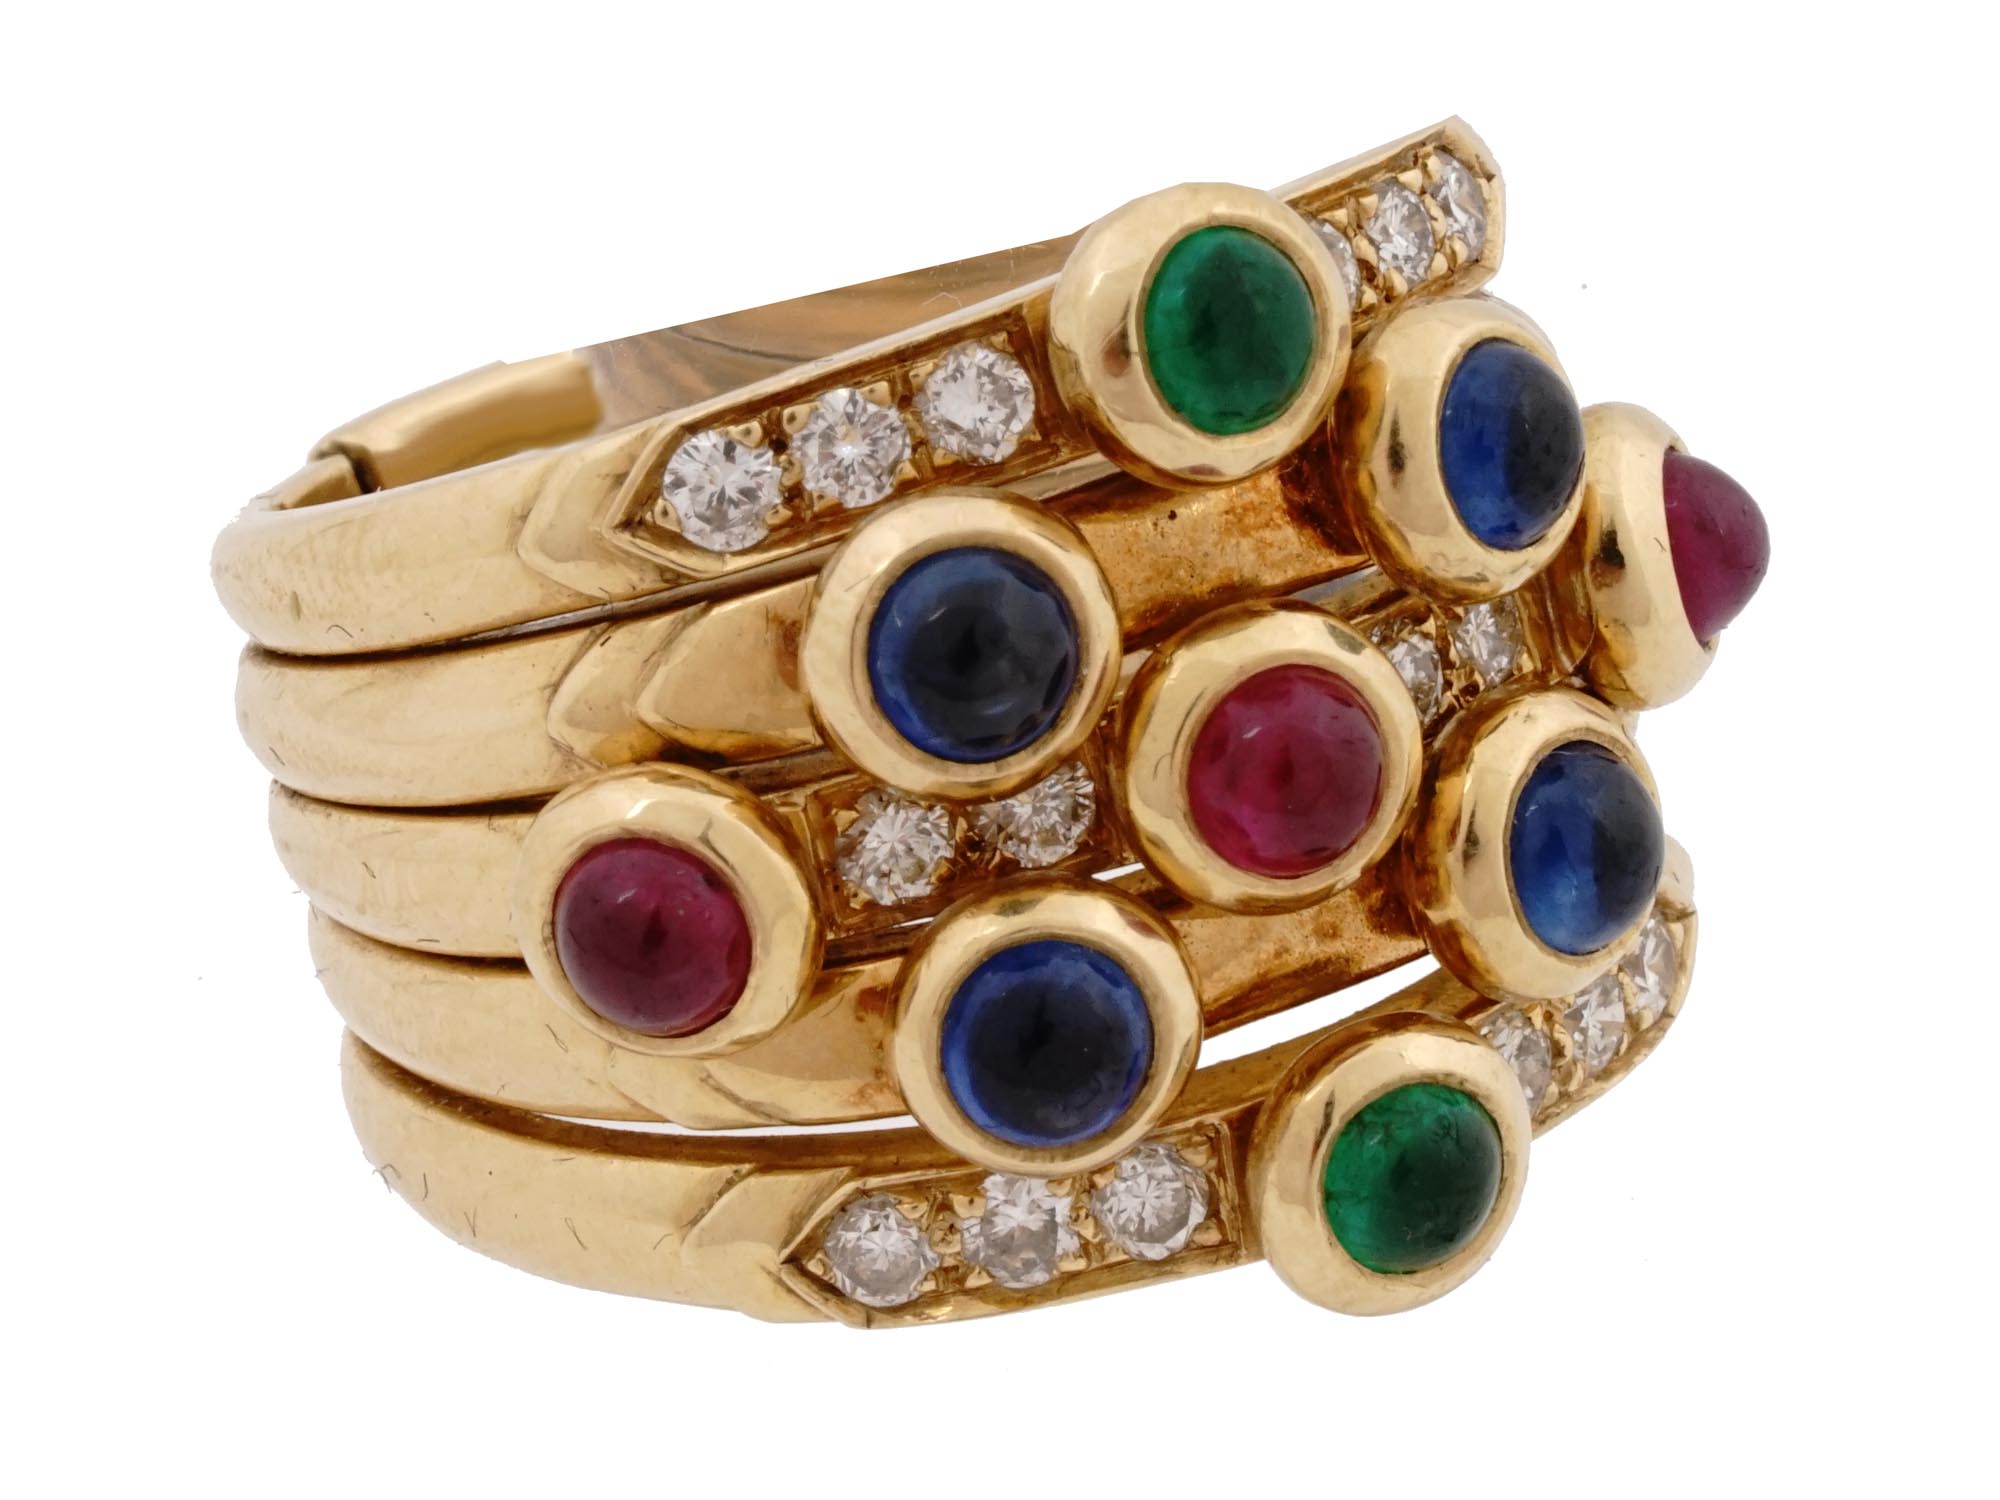 VINTAGE 18K GOLD GEMSTONE CLUSTER RING WITH STONES PIC-2